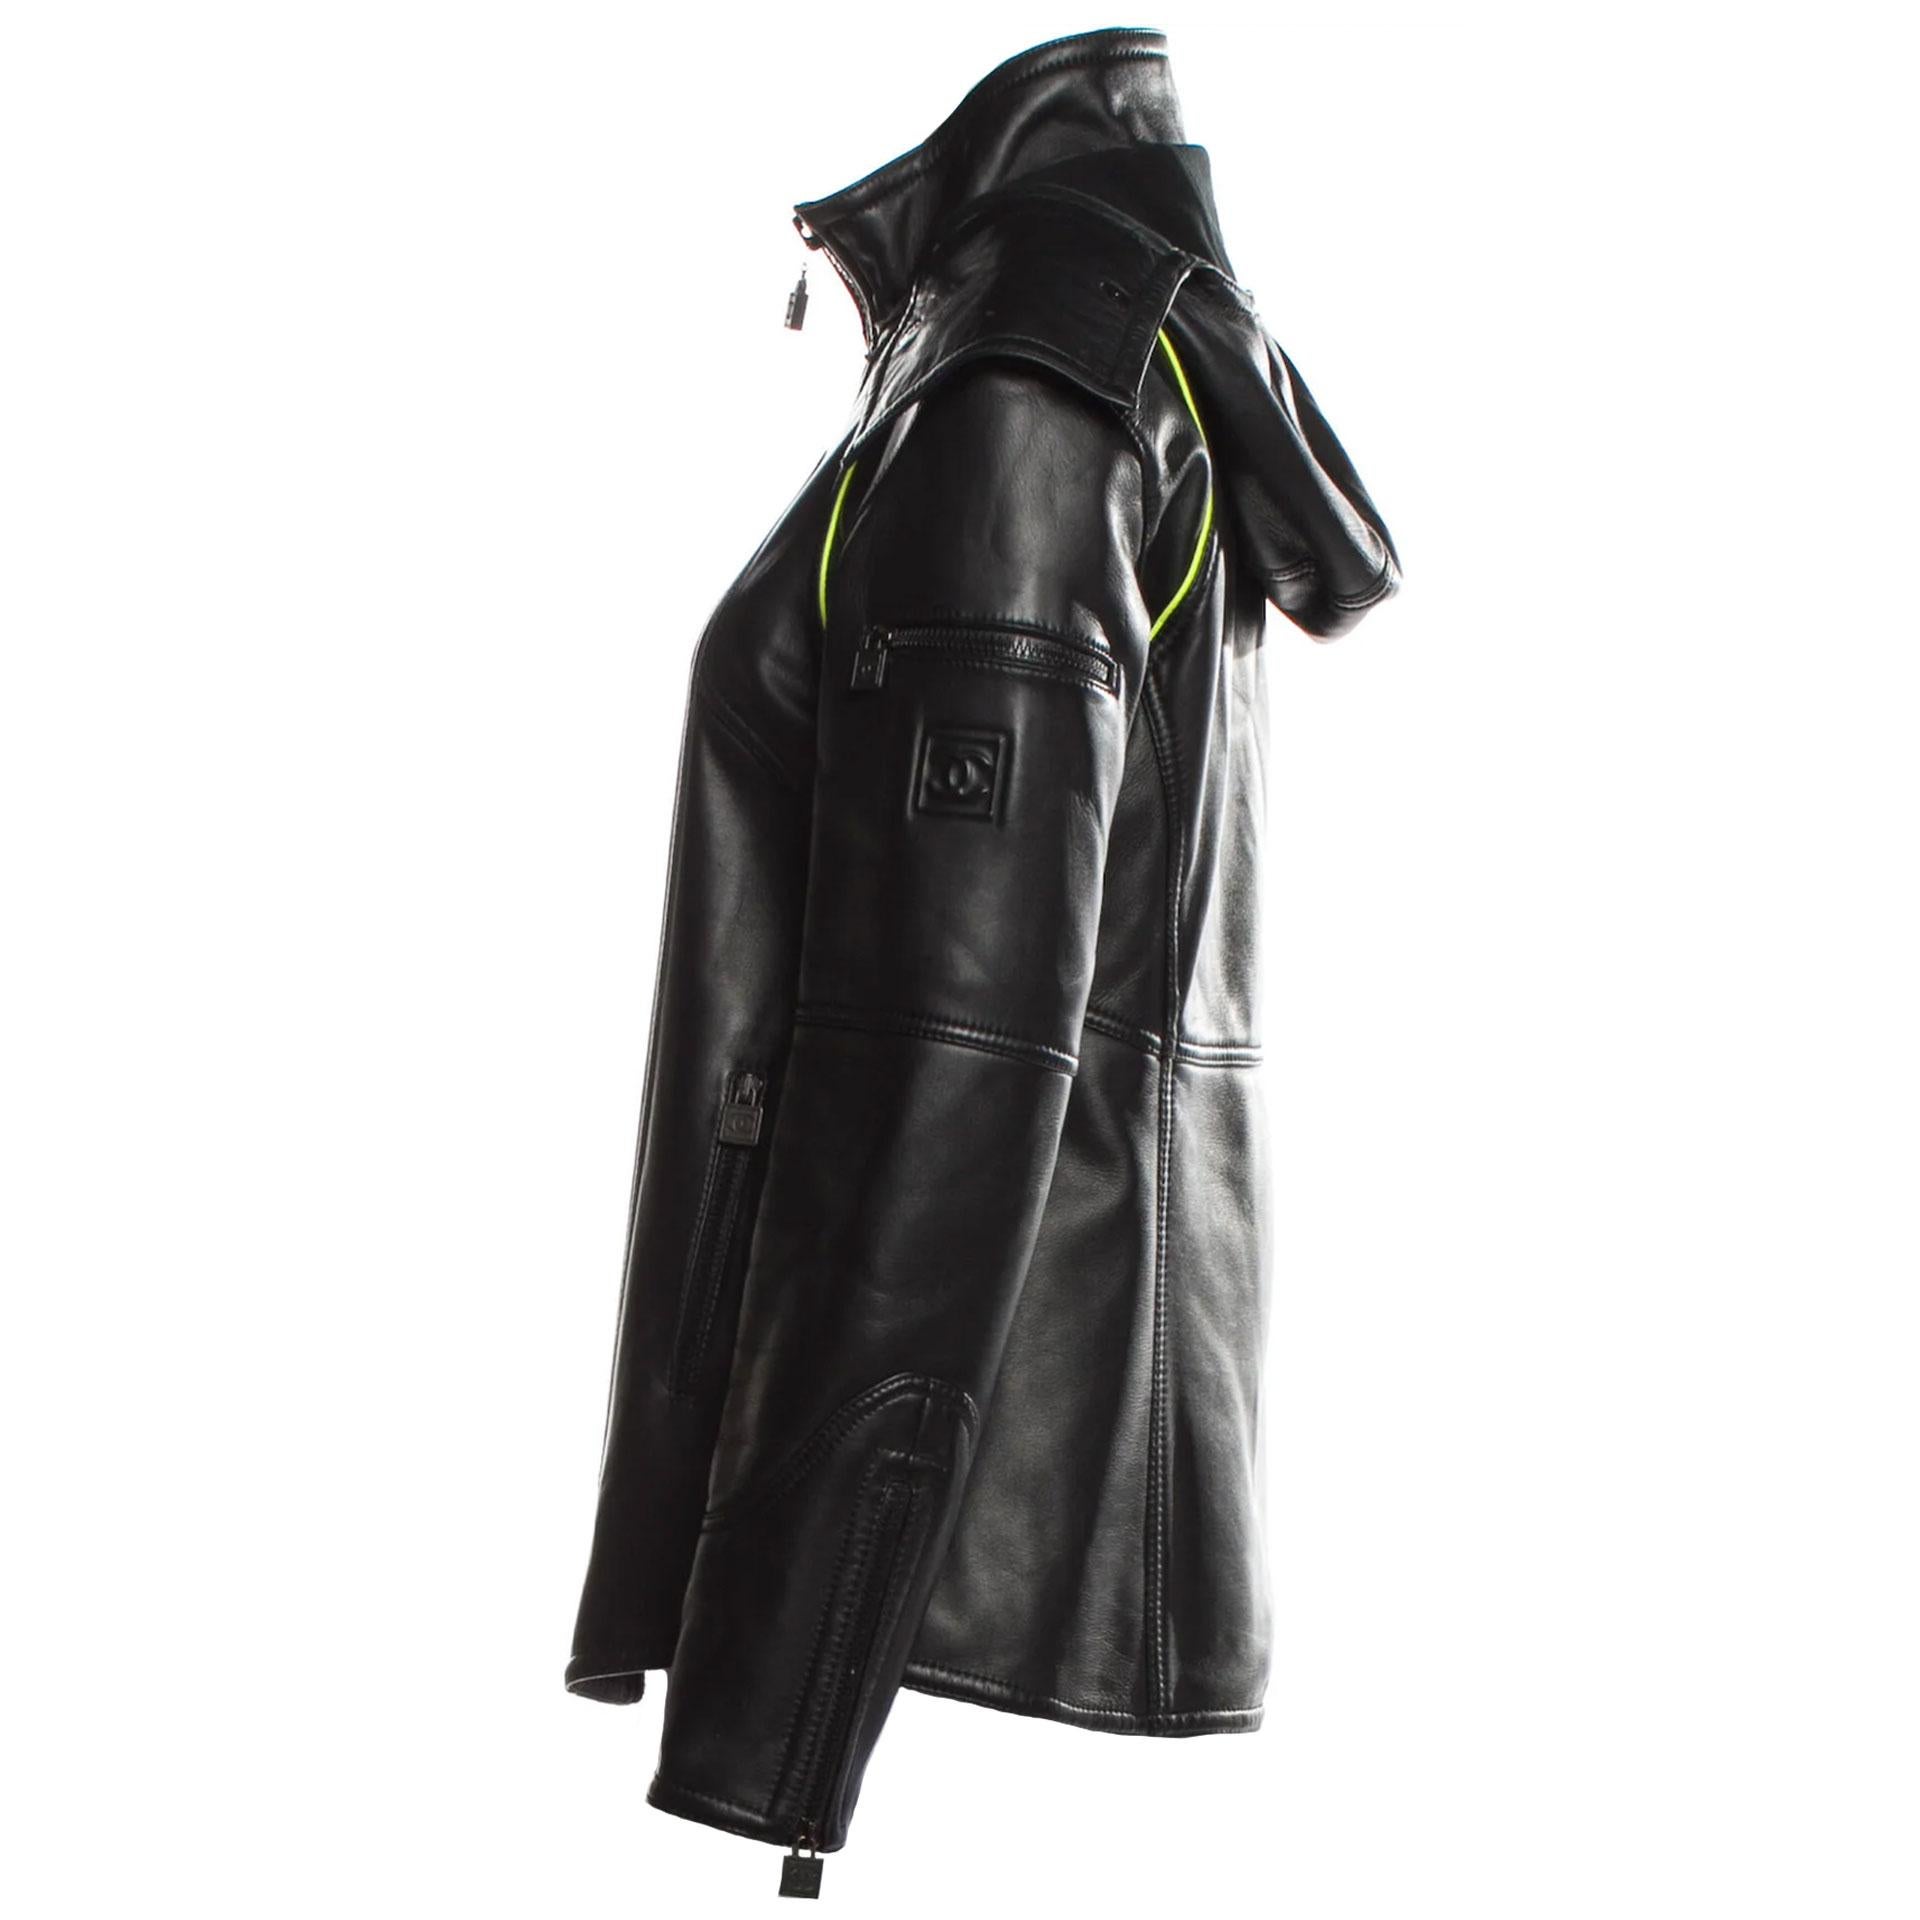 Chanel 2004 Limited Edition Runway Hooded Leather Sport Biker Jacket M US8 FR 40 In Good Condition For Sale In Miami, FL